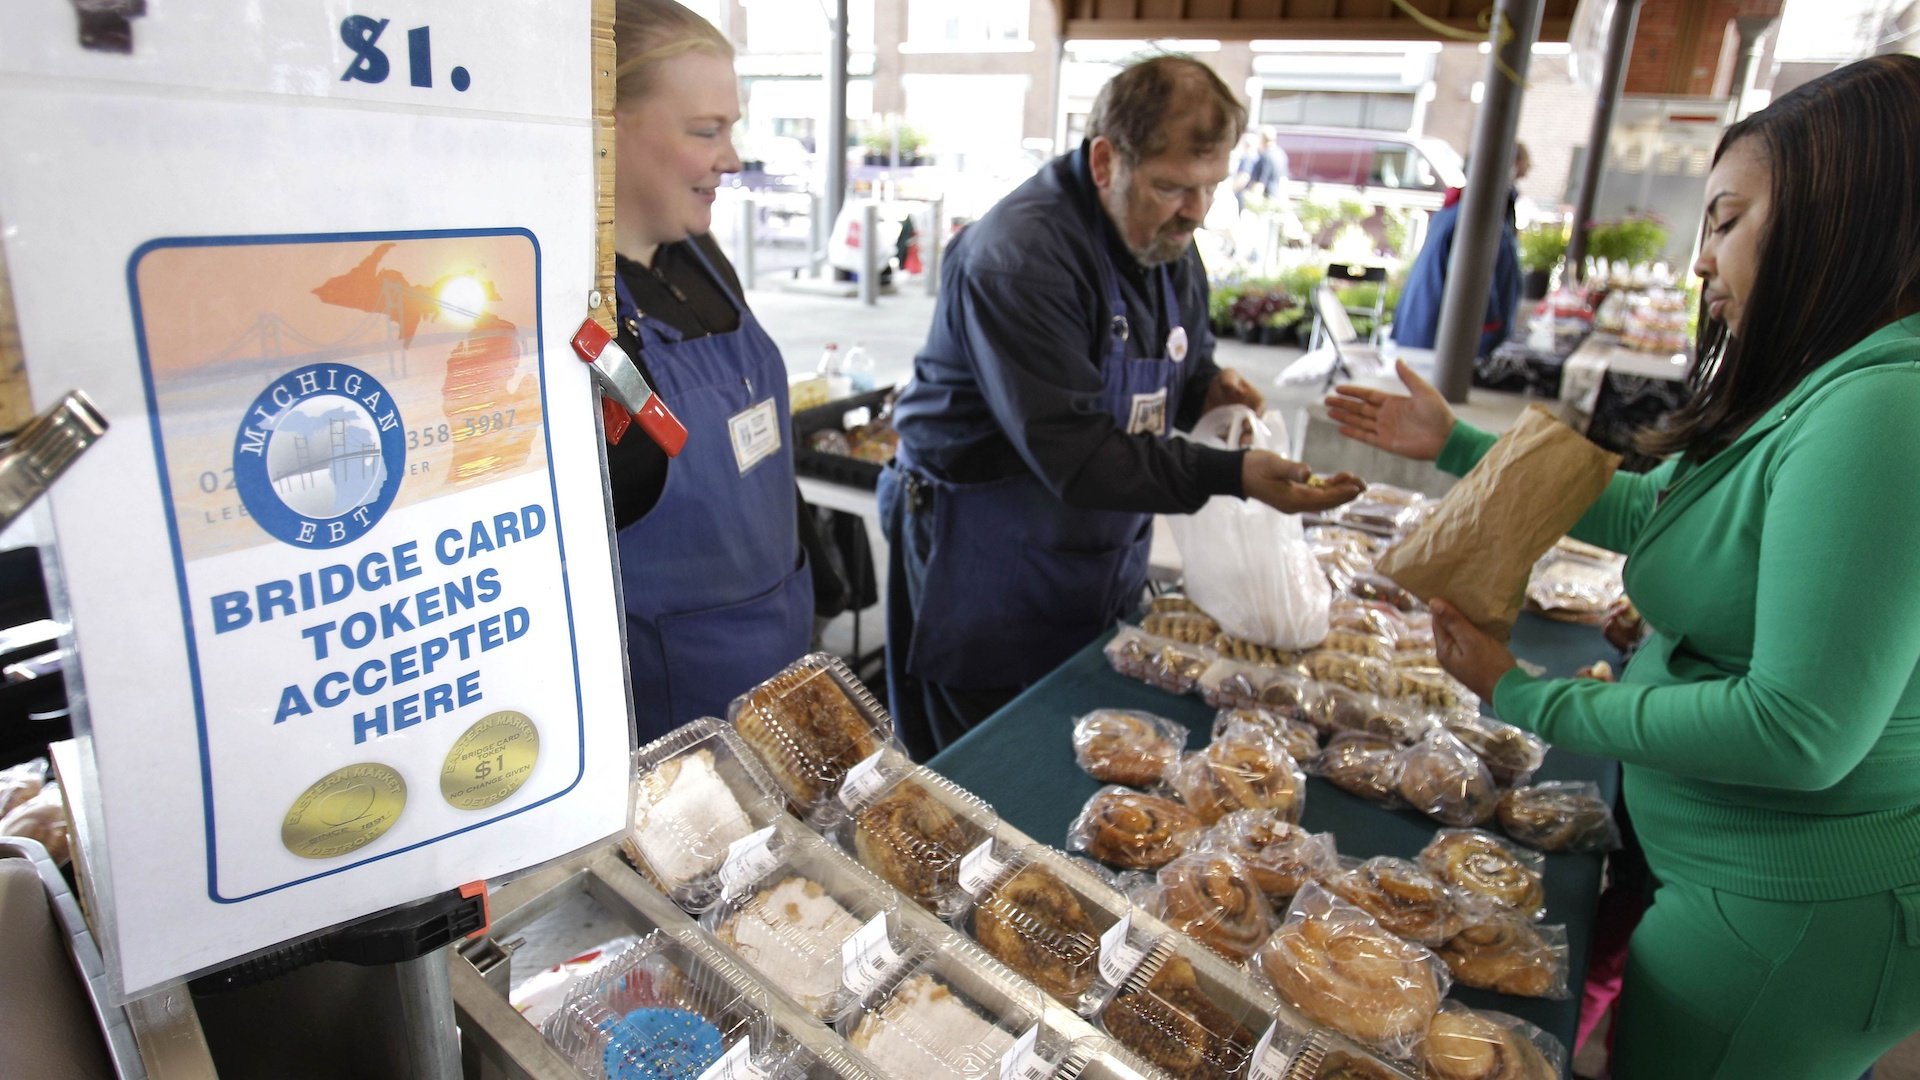 In a Sept. 11, 2010, file photo, Temeka Williams, right, of Detroit, uses her bridge card tokens for a purchase from Elizabeth and Gary Lauber from Sweet Delights at the Farmer's Market in Detroit. Farmers, growers and operators of open-air markets are heading into a busy time of the year, in early May 2020, as many states still are under stay-at-home orders for residents and non-essential businesses to slow the spread of the new coronavirus. (AP Photo/Carlos Osorio, File)